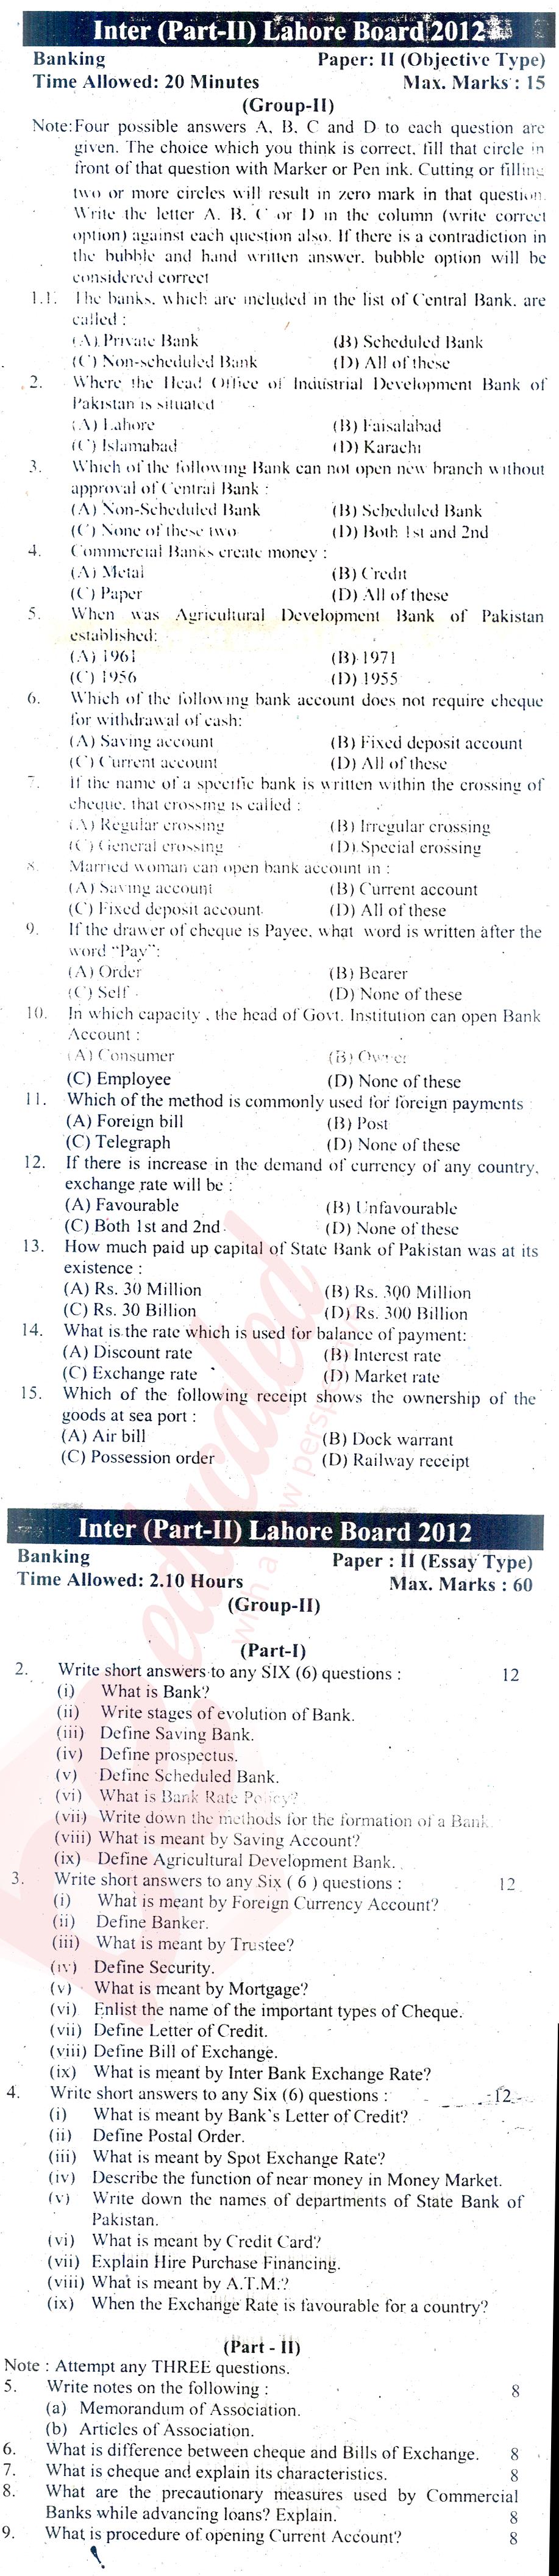 Principles of Banking ICOM Part 2 Past Paper Group 2 BISE Lahore 2012